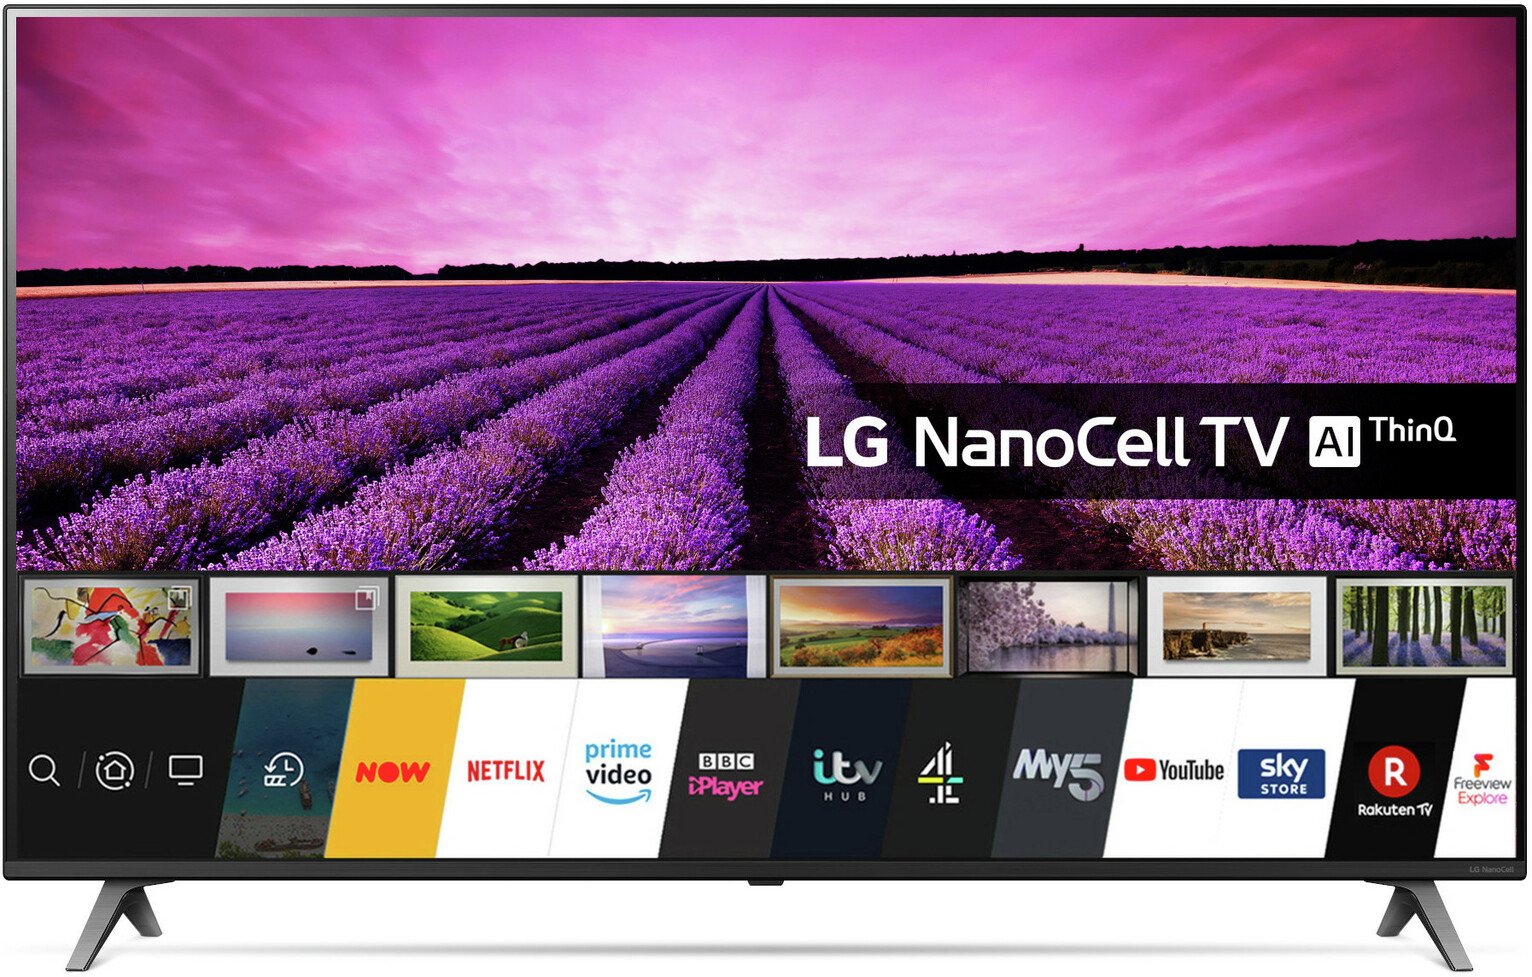 LG 65 Inch 65SM8050 Smart 4K Ultra HD LED TV with HDR Review